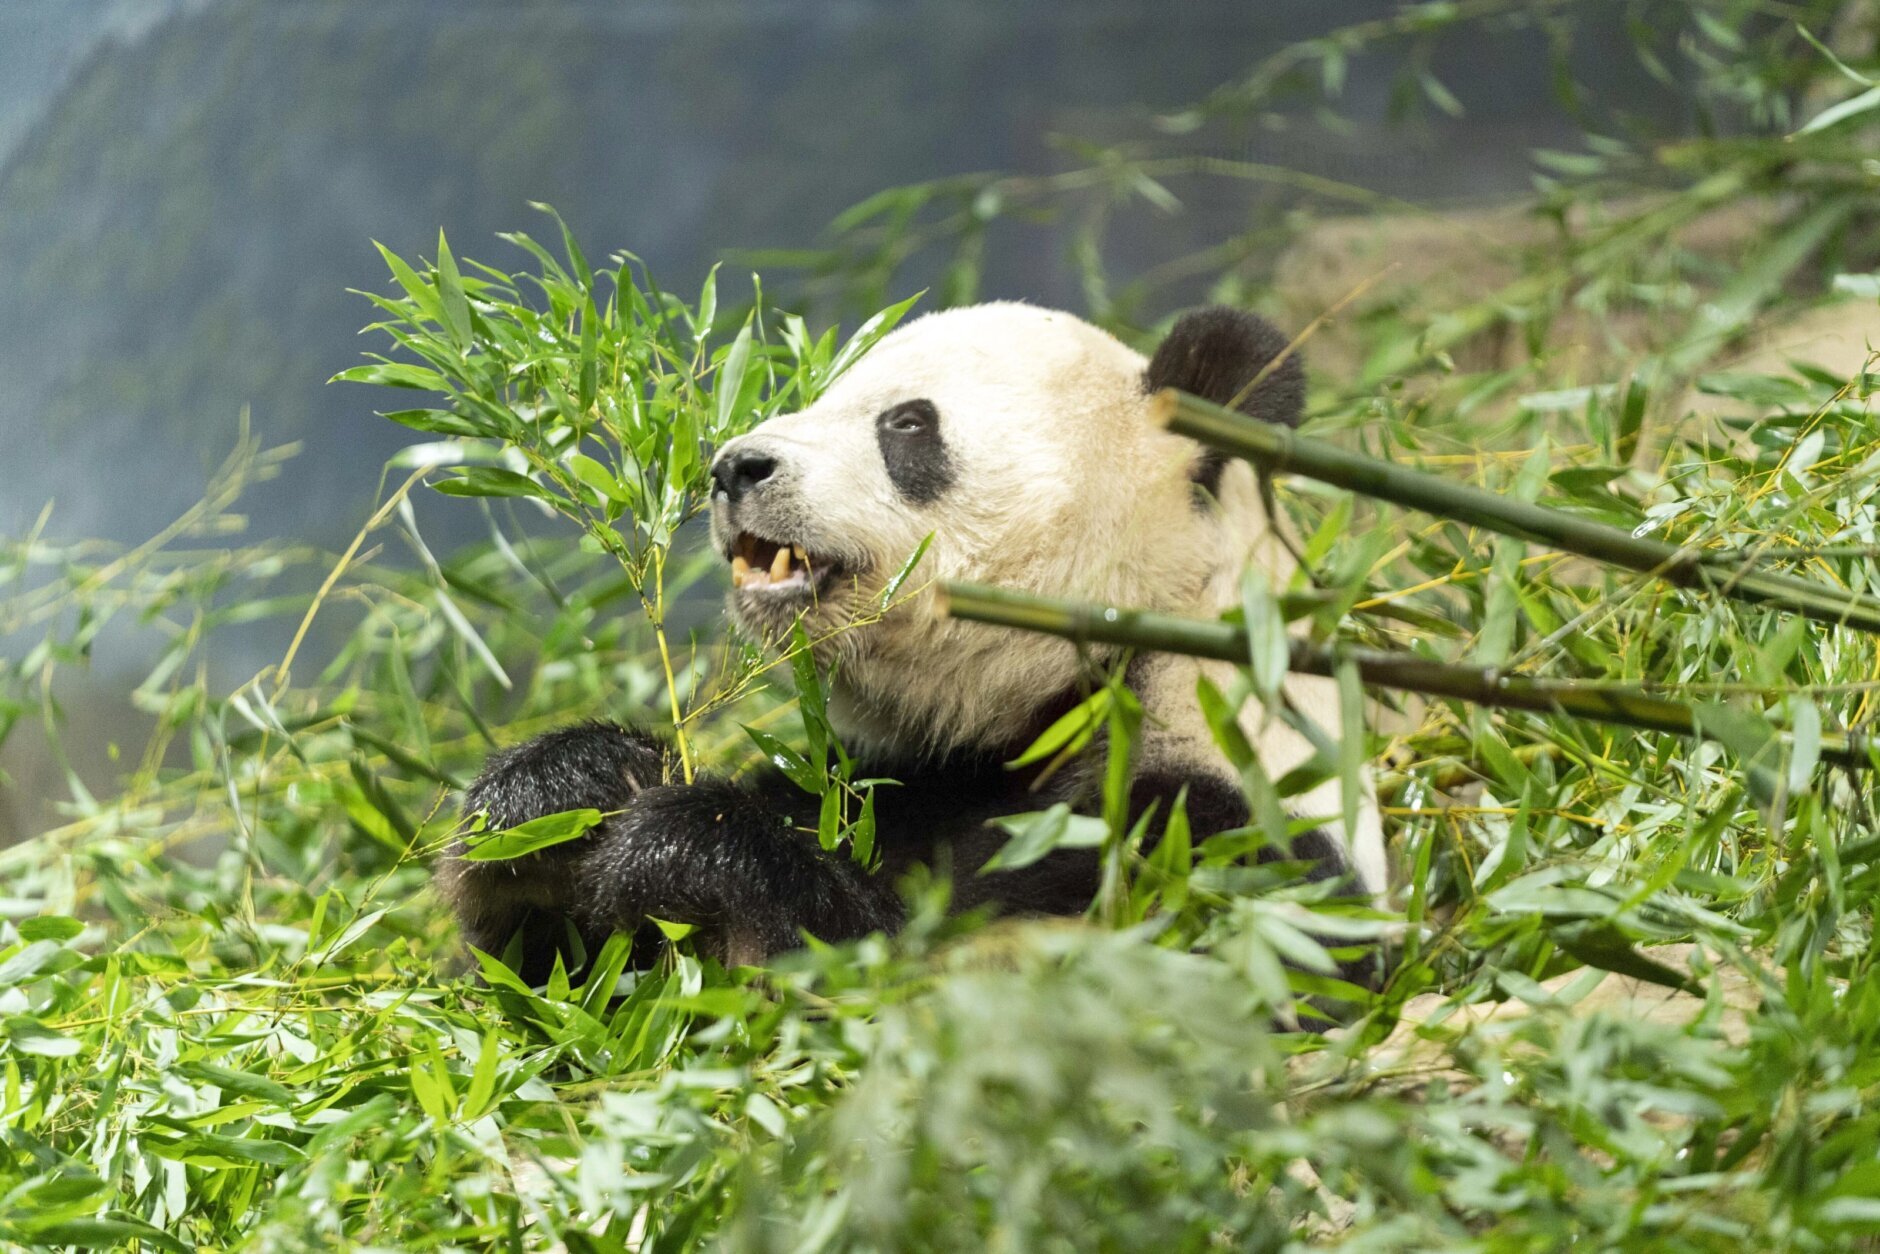 The National Zoo is throwing a sendoff party for its pandas